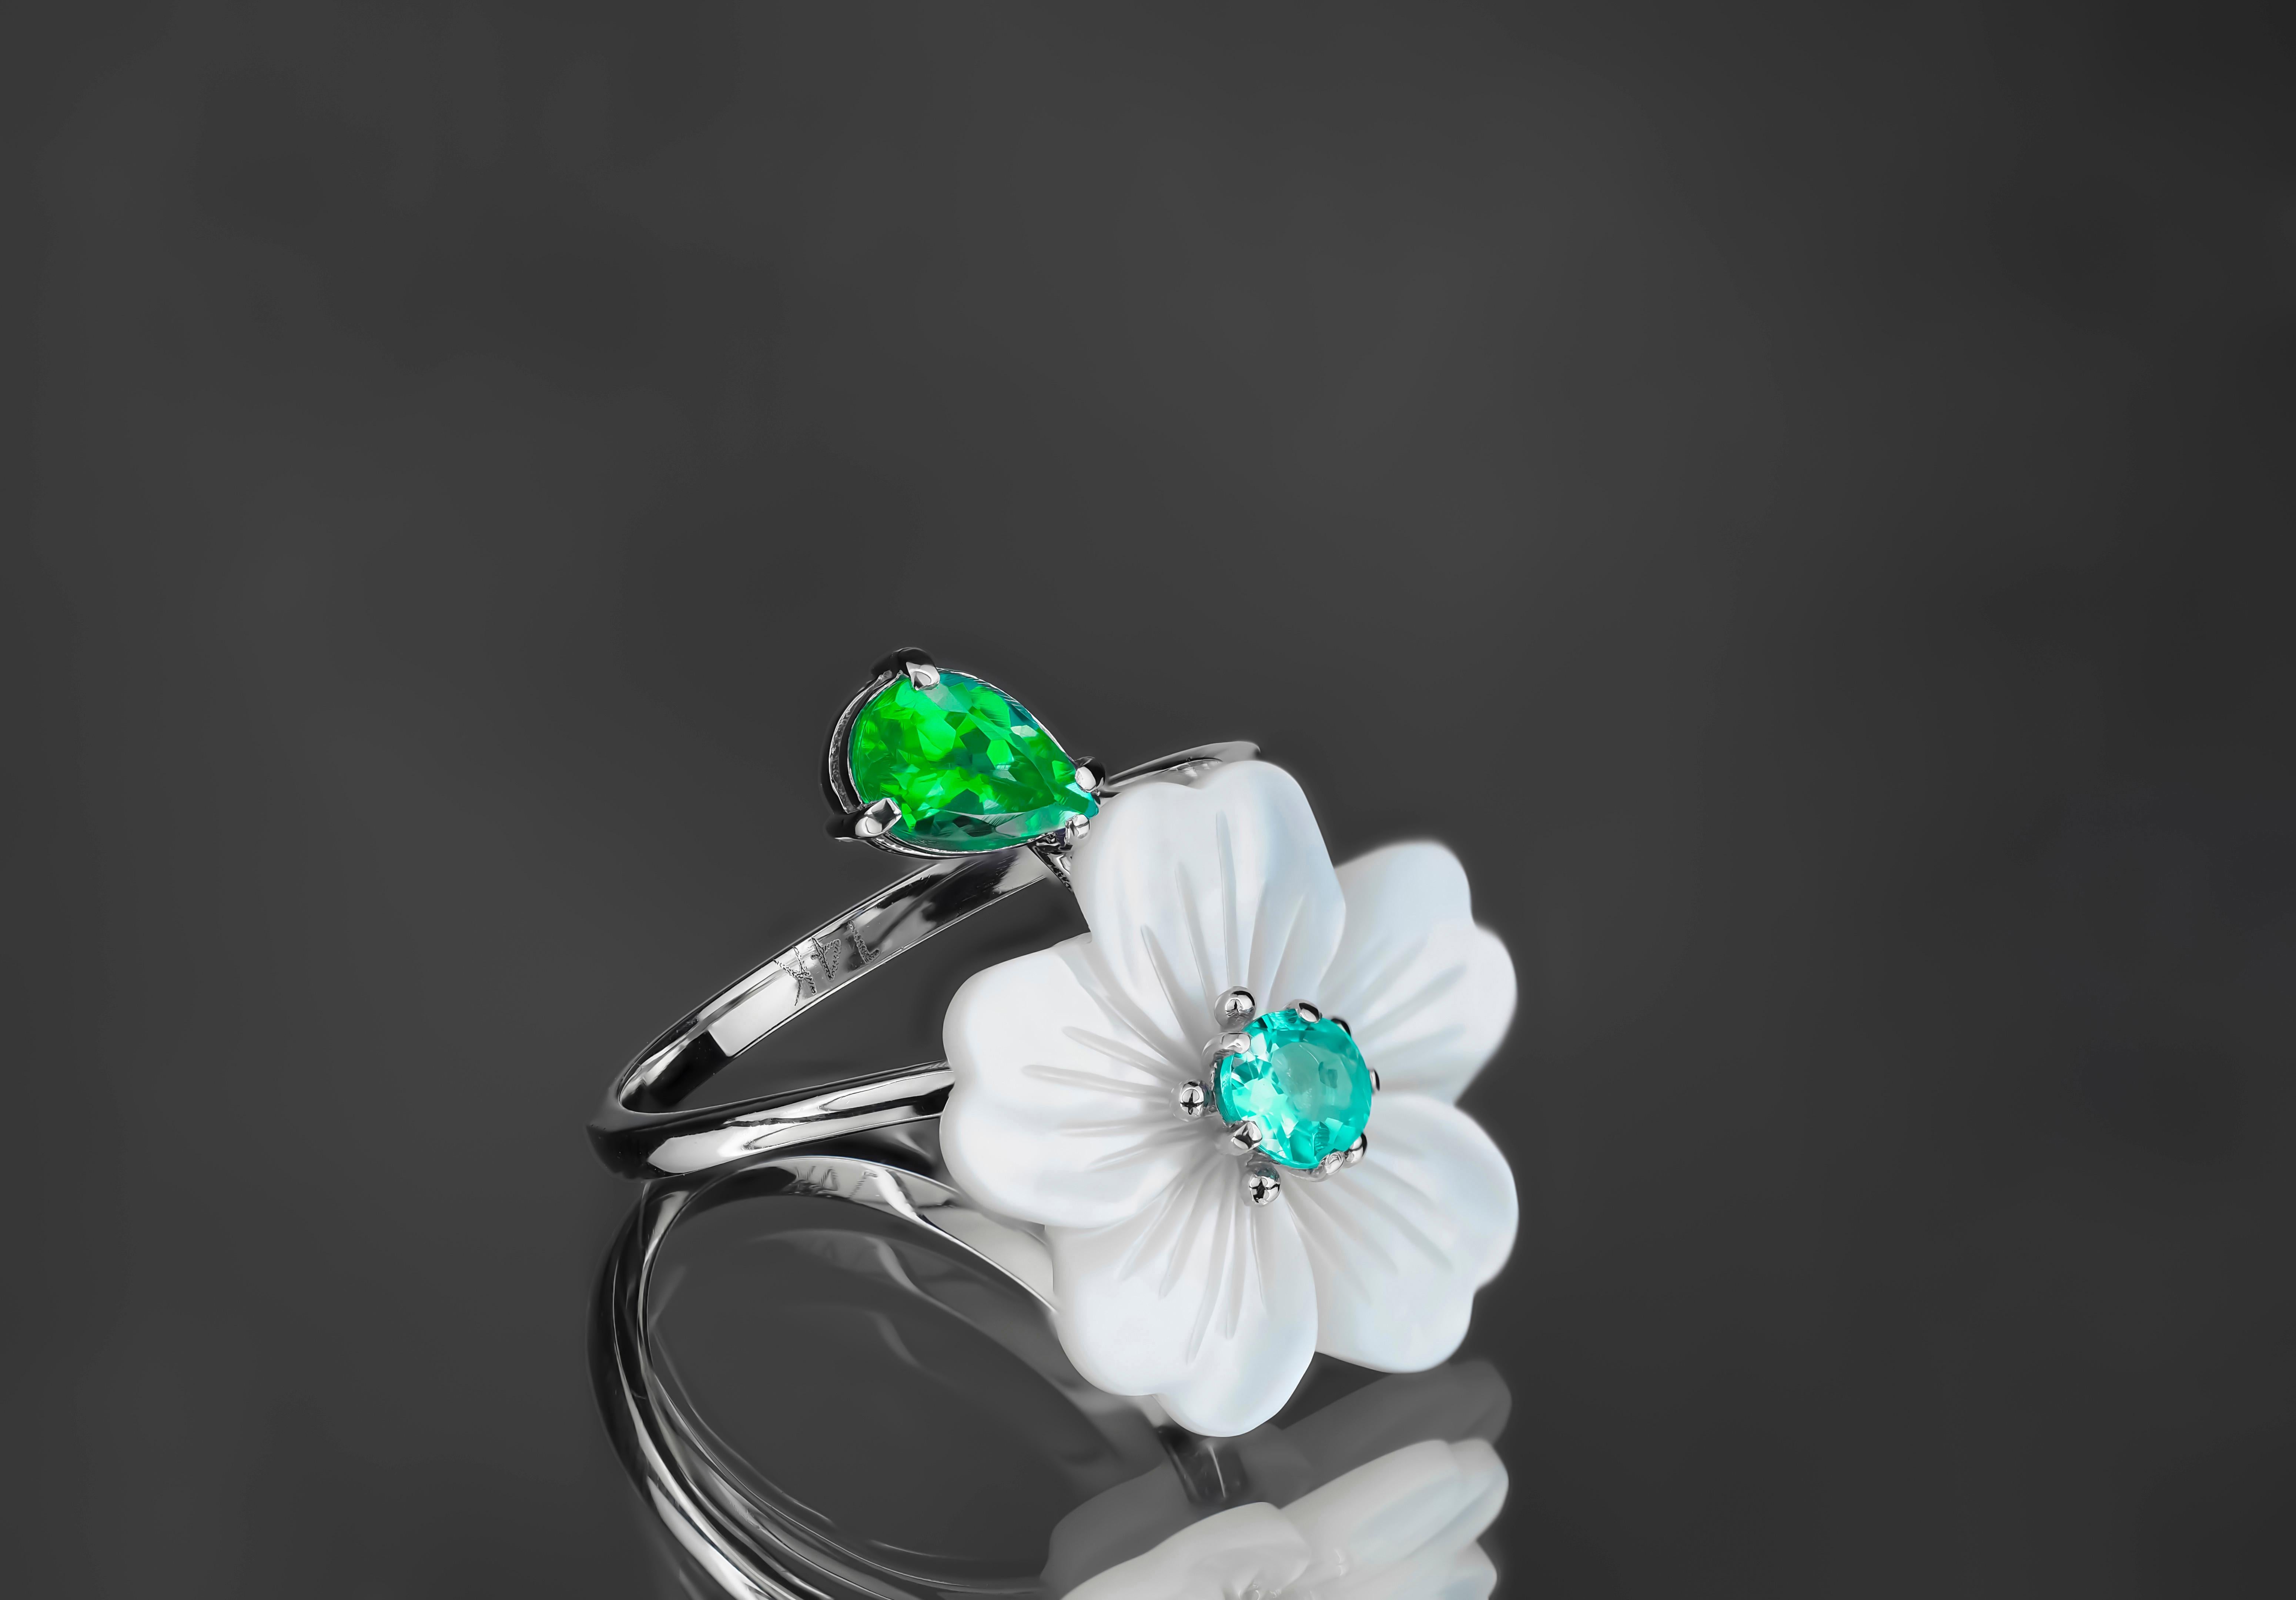 Carved Flower 14k ring with gemstones.
Lab emerald and paraiba color cz ring in 14k gold. Carved mother of pearl flower ring. Flower gold ring. Emerald vintage ring. Nature inspired ring with mother of pearl flower. Shell flower ring.

Metal: 14k